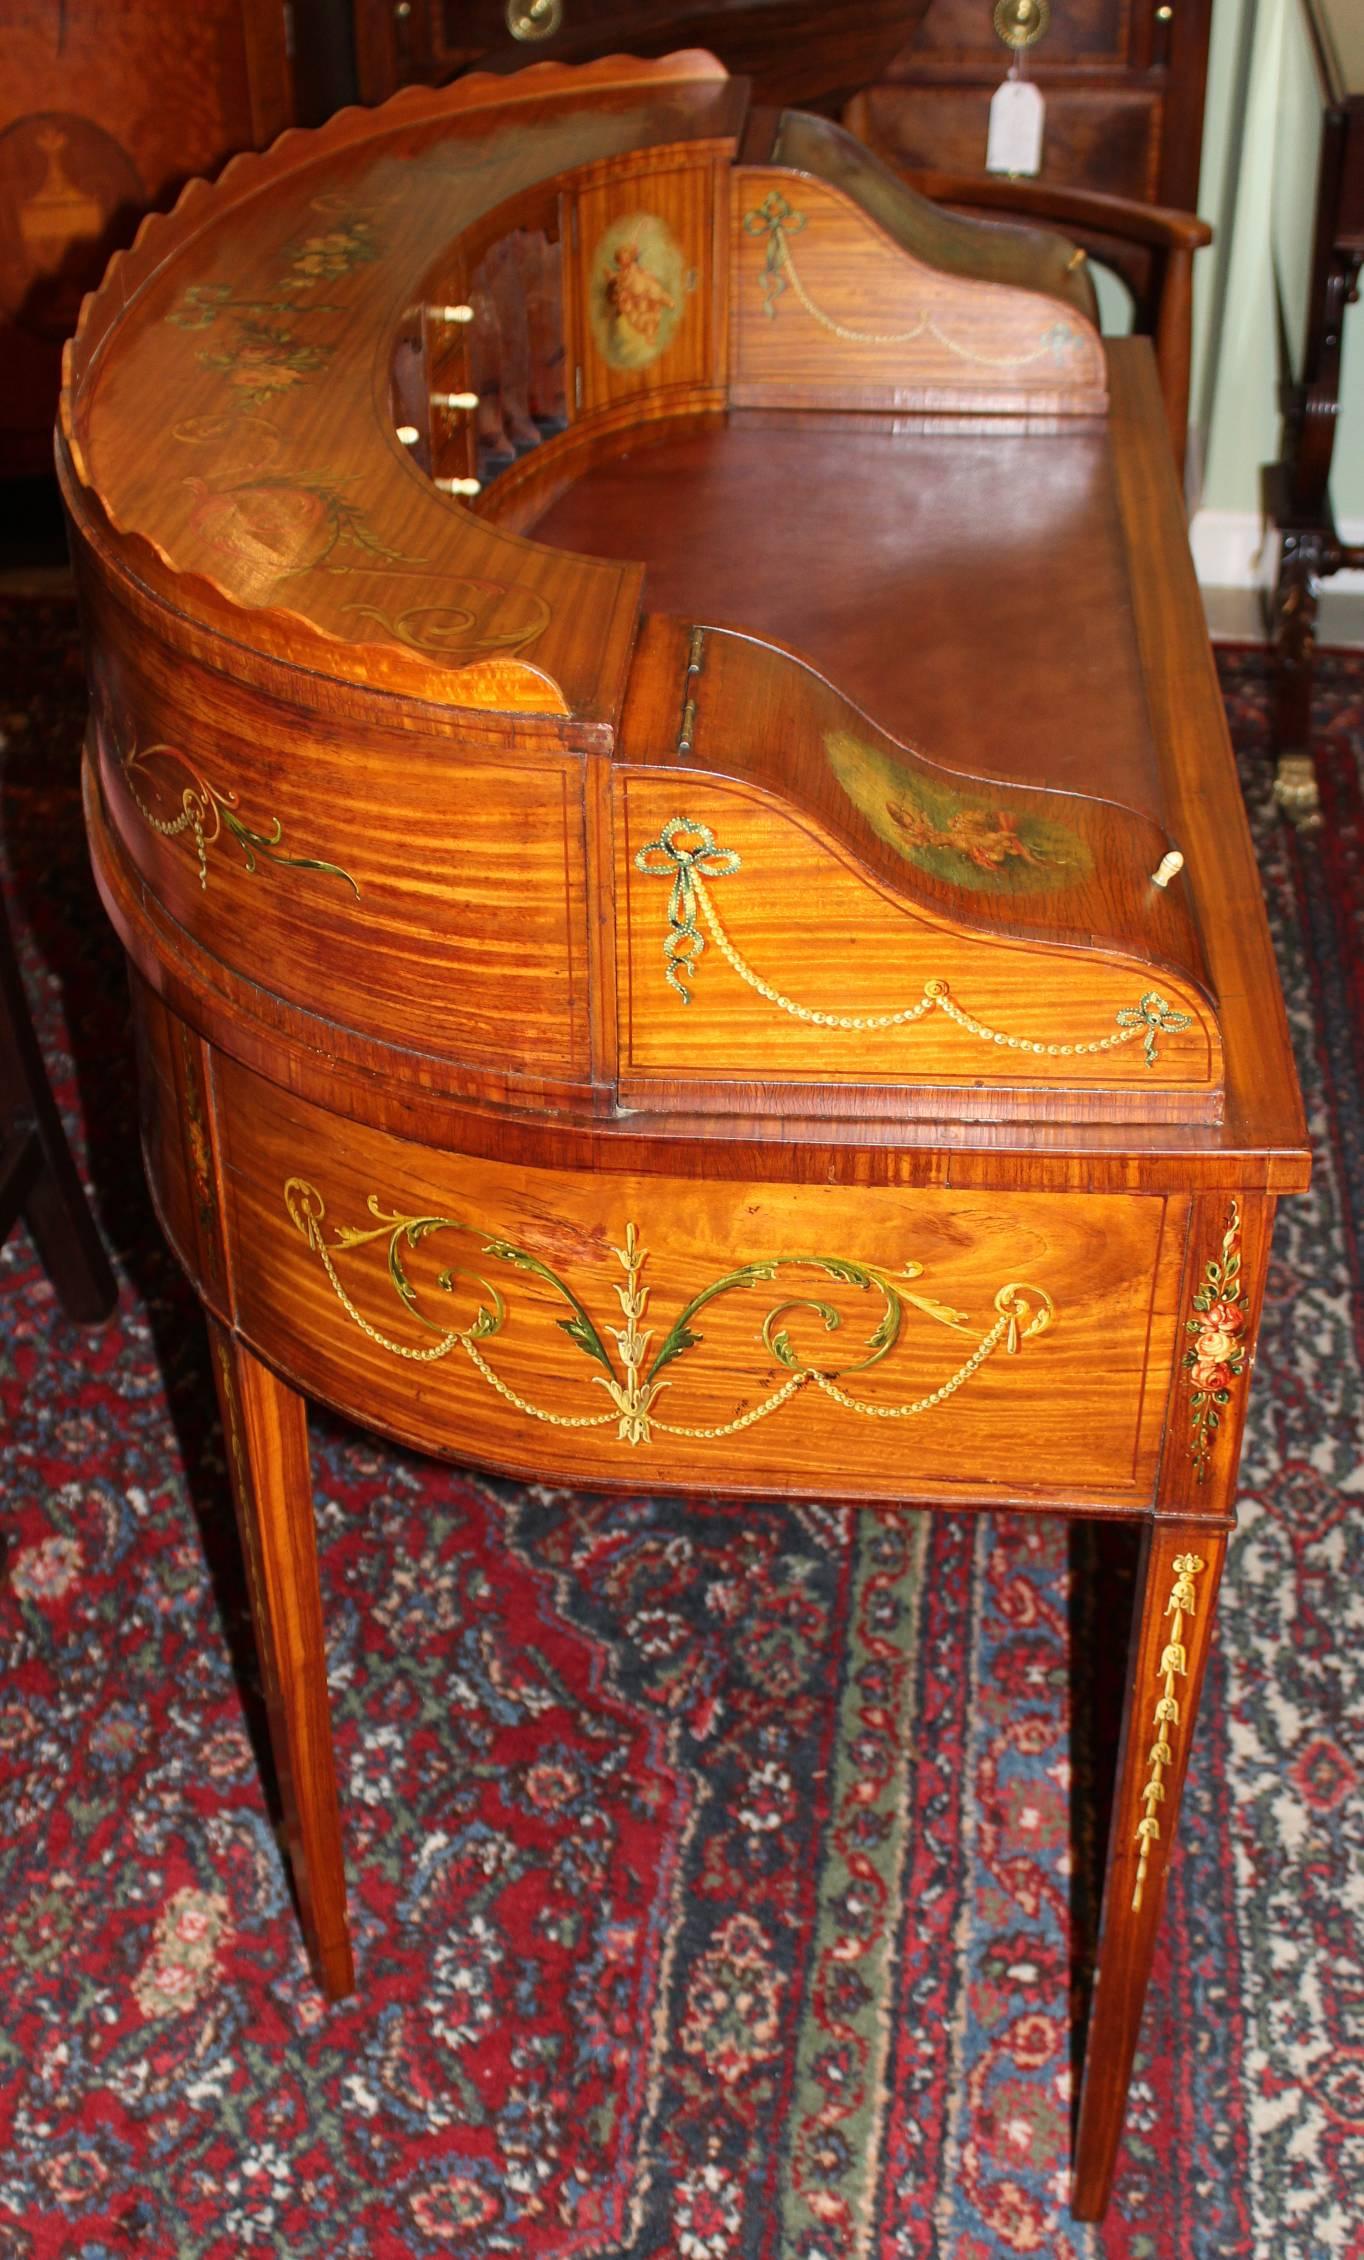 Carved Edwardian Hand-Painted Carlton Desk in Satinwood with Leather Insert